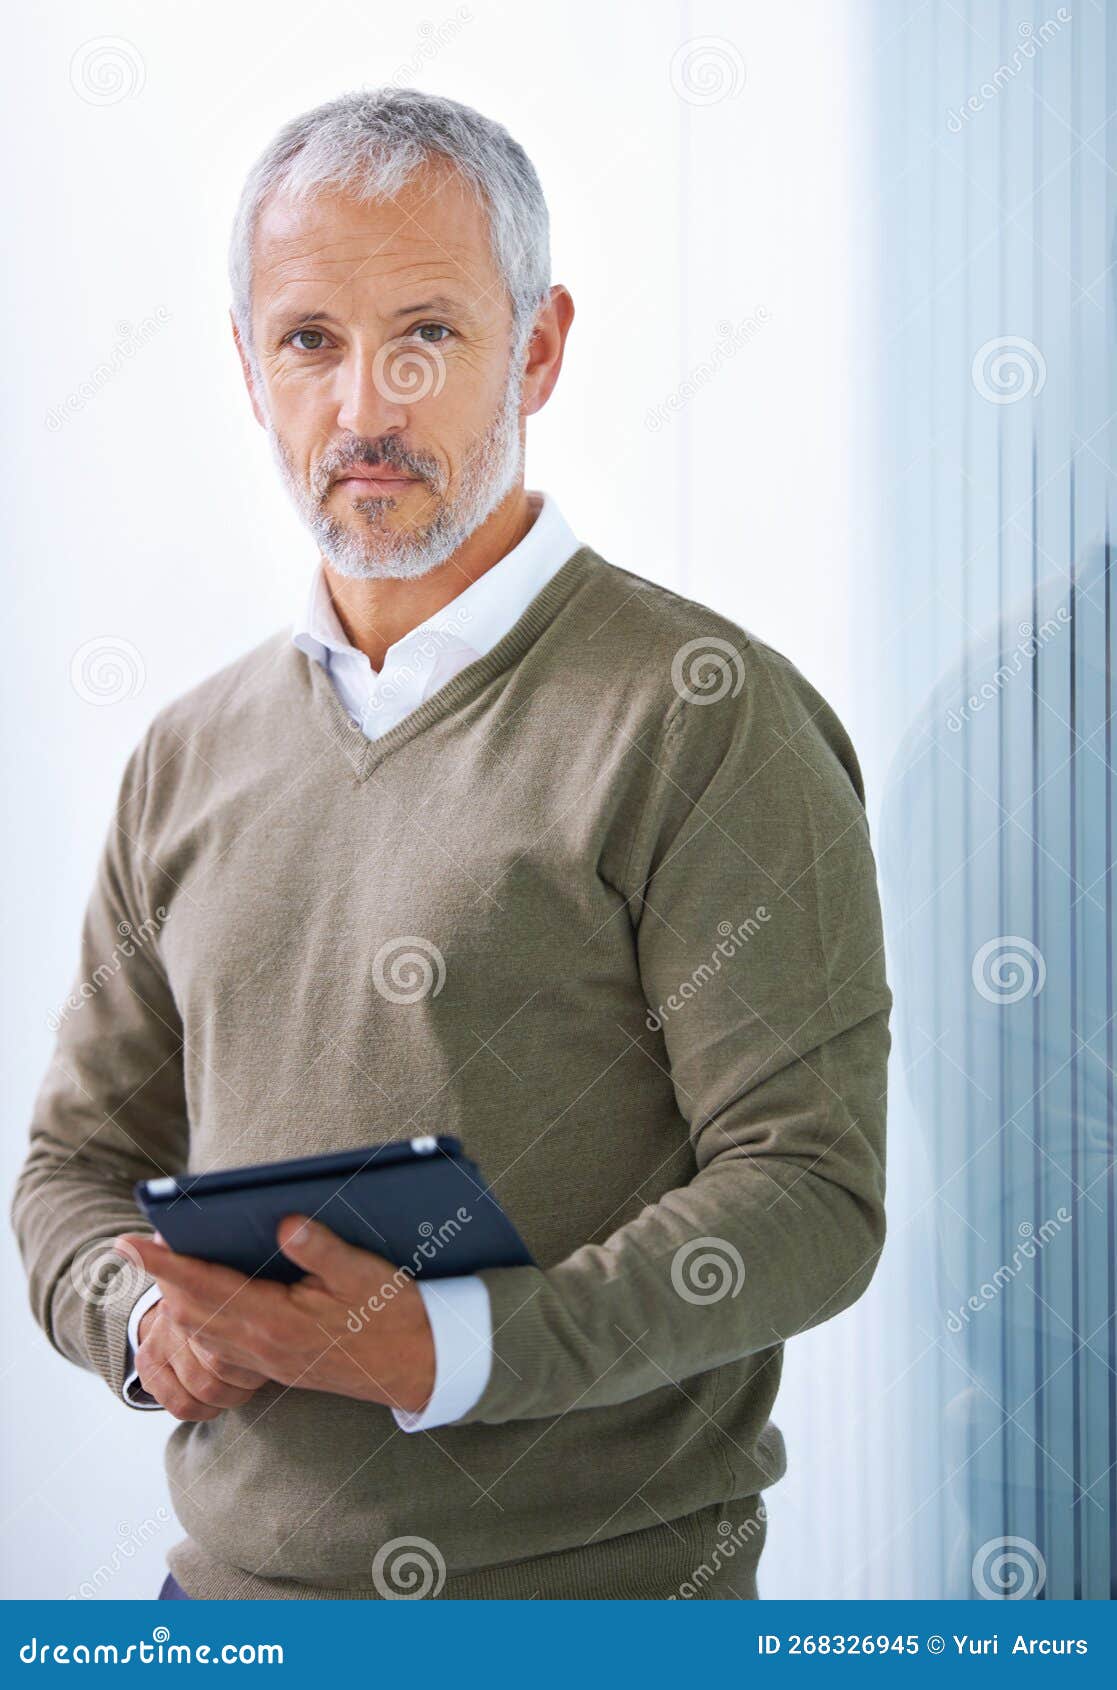 tech for the modern exec. portrait of a mature businessman standing with a digital tablet.